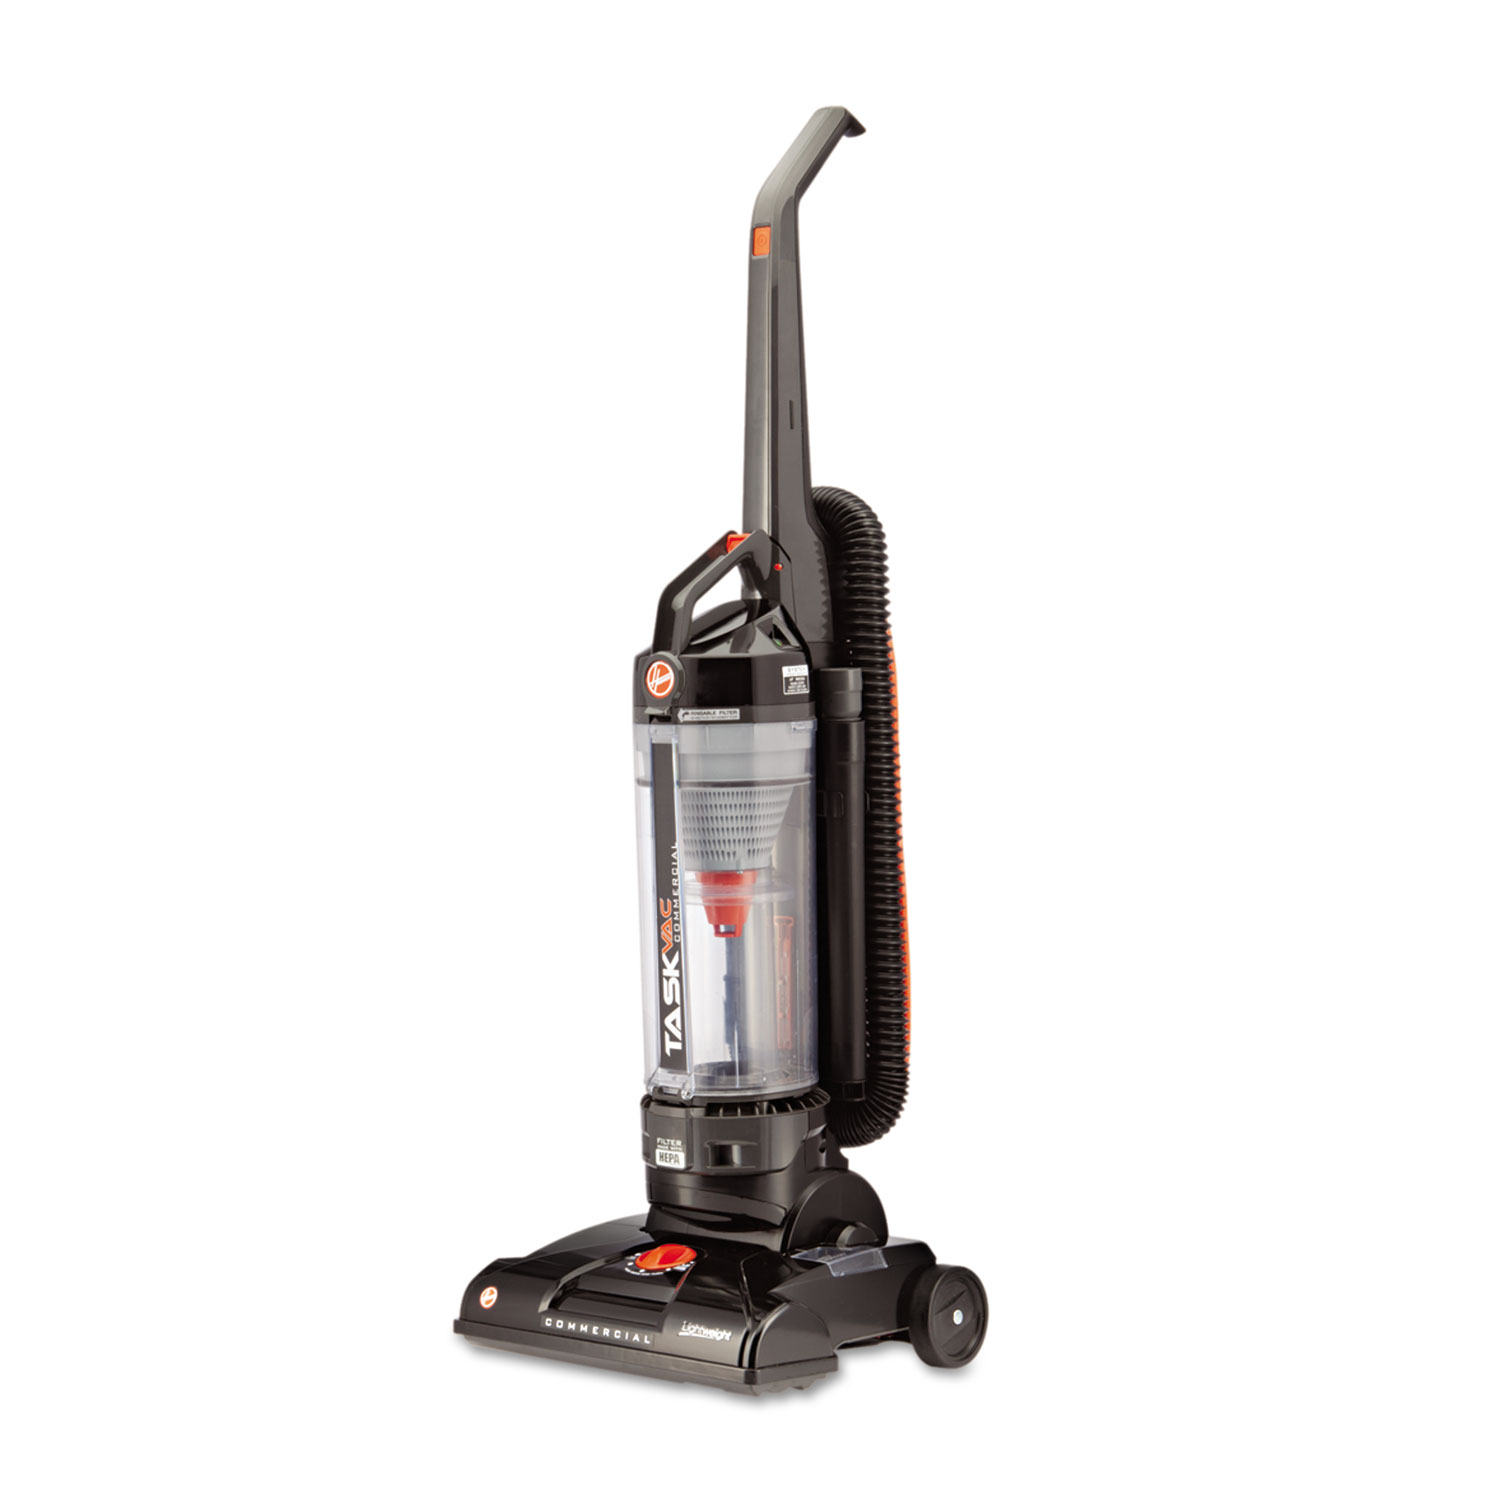  Hoover Commercial CH53010 Task Vac Bagless Lightweight Upright (HVRCH53010) 